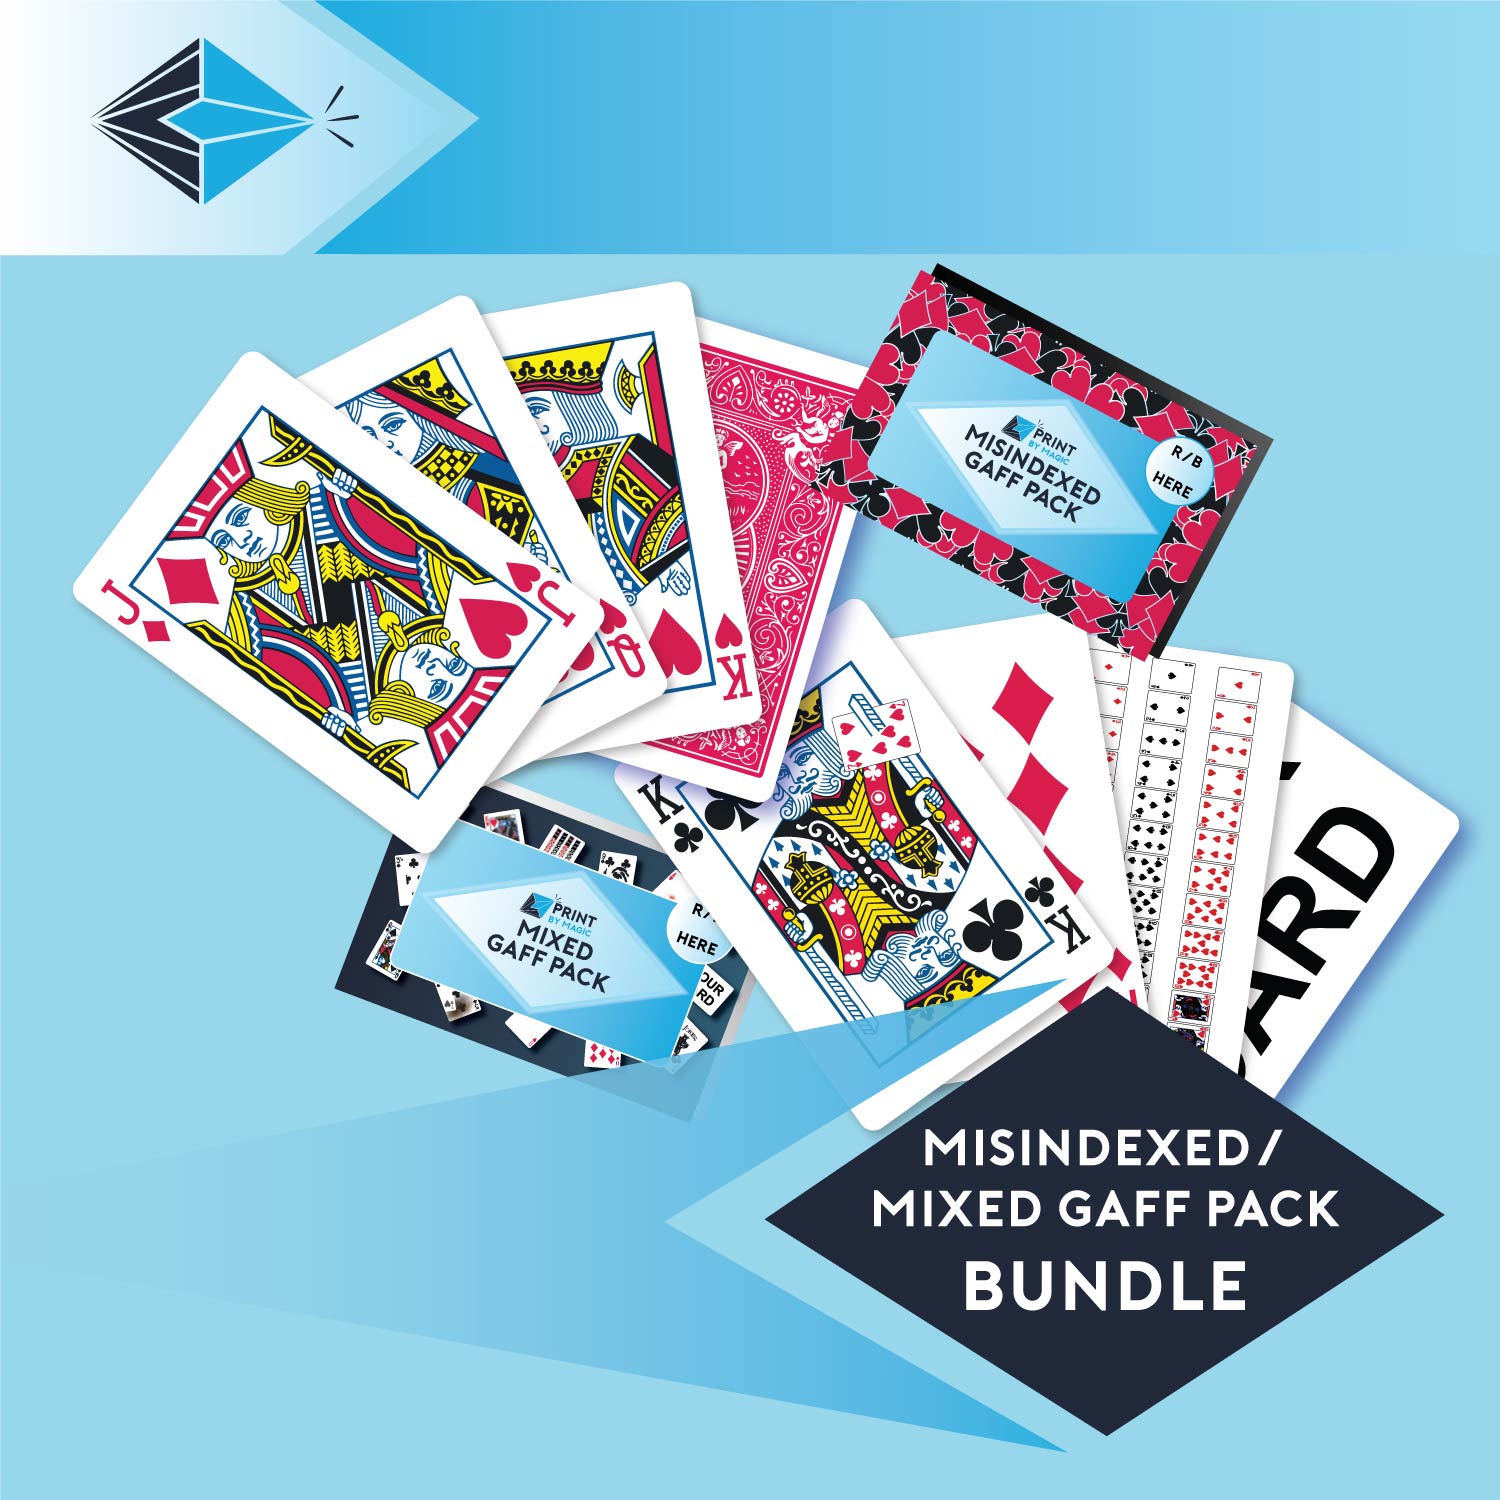 Product image displaying a gaff pack bundle, showcasing PrintbyMagics Mixed Gaff Pack, as well as the Misindexed Gaff Pack, all in one simple package.